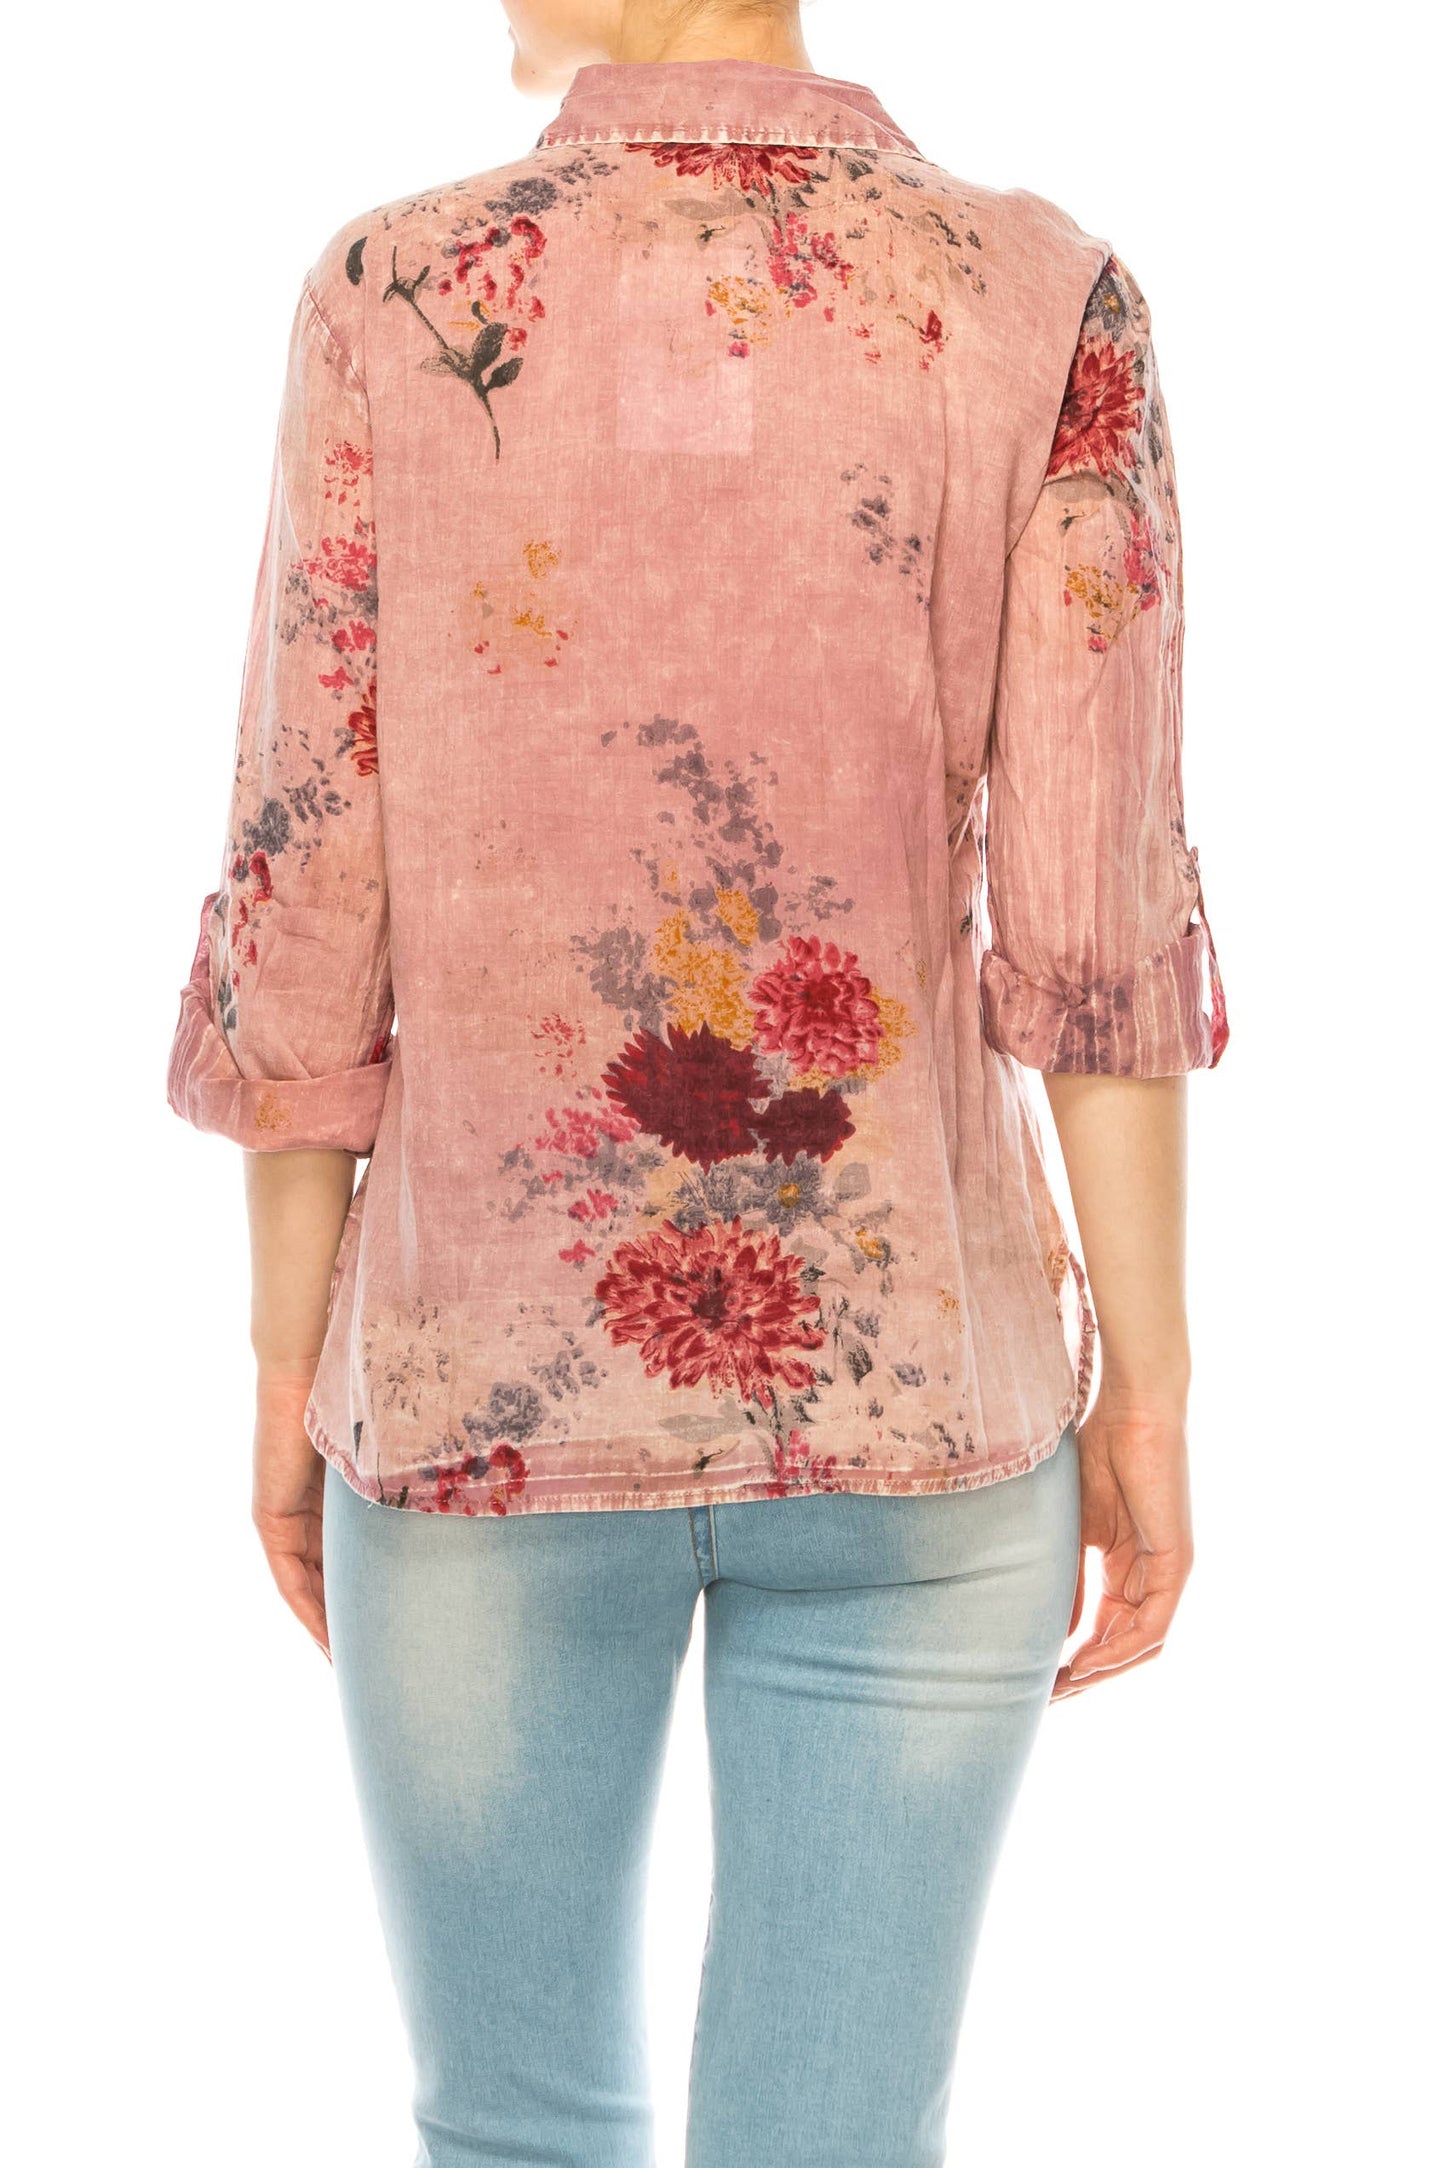 Magazine Clothing - Vintage Pink Floral Printed Shirt with Embroidery: Large